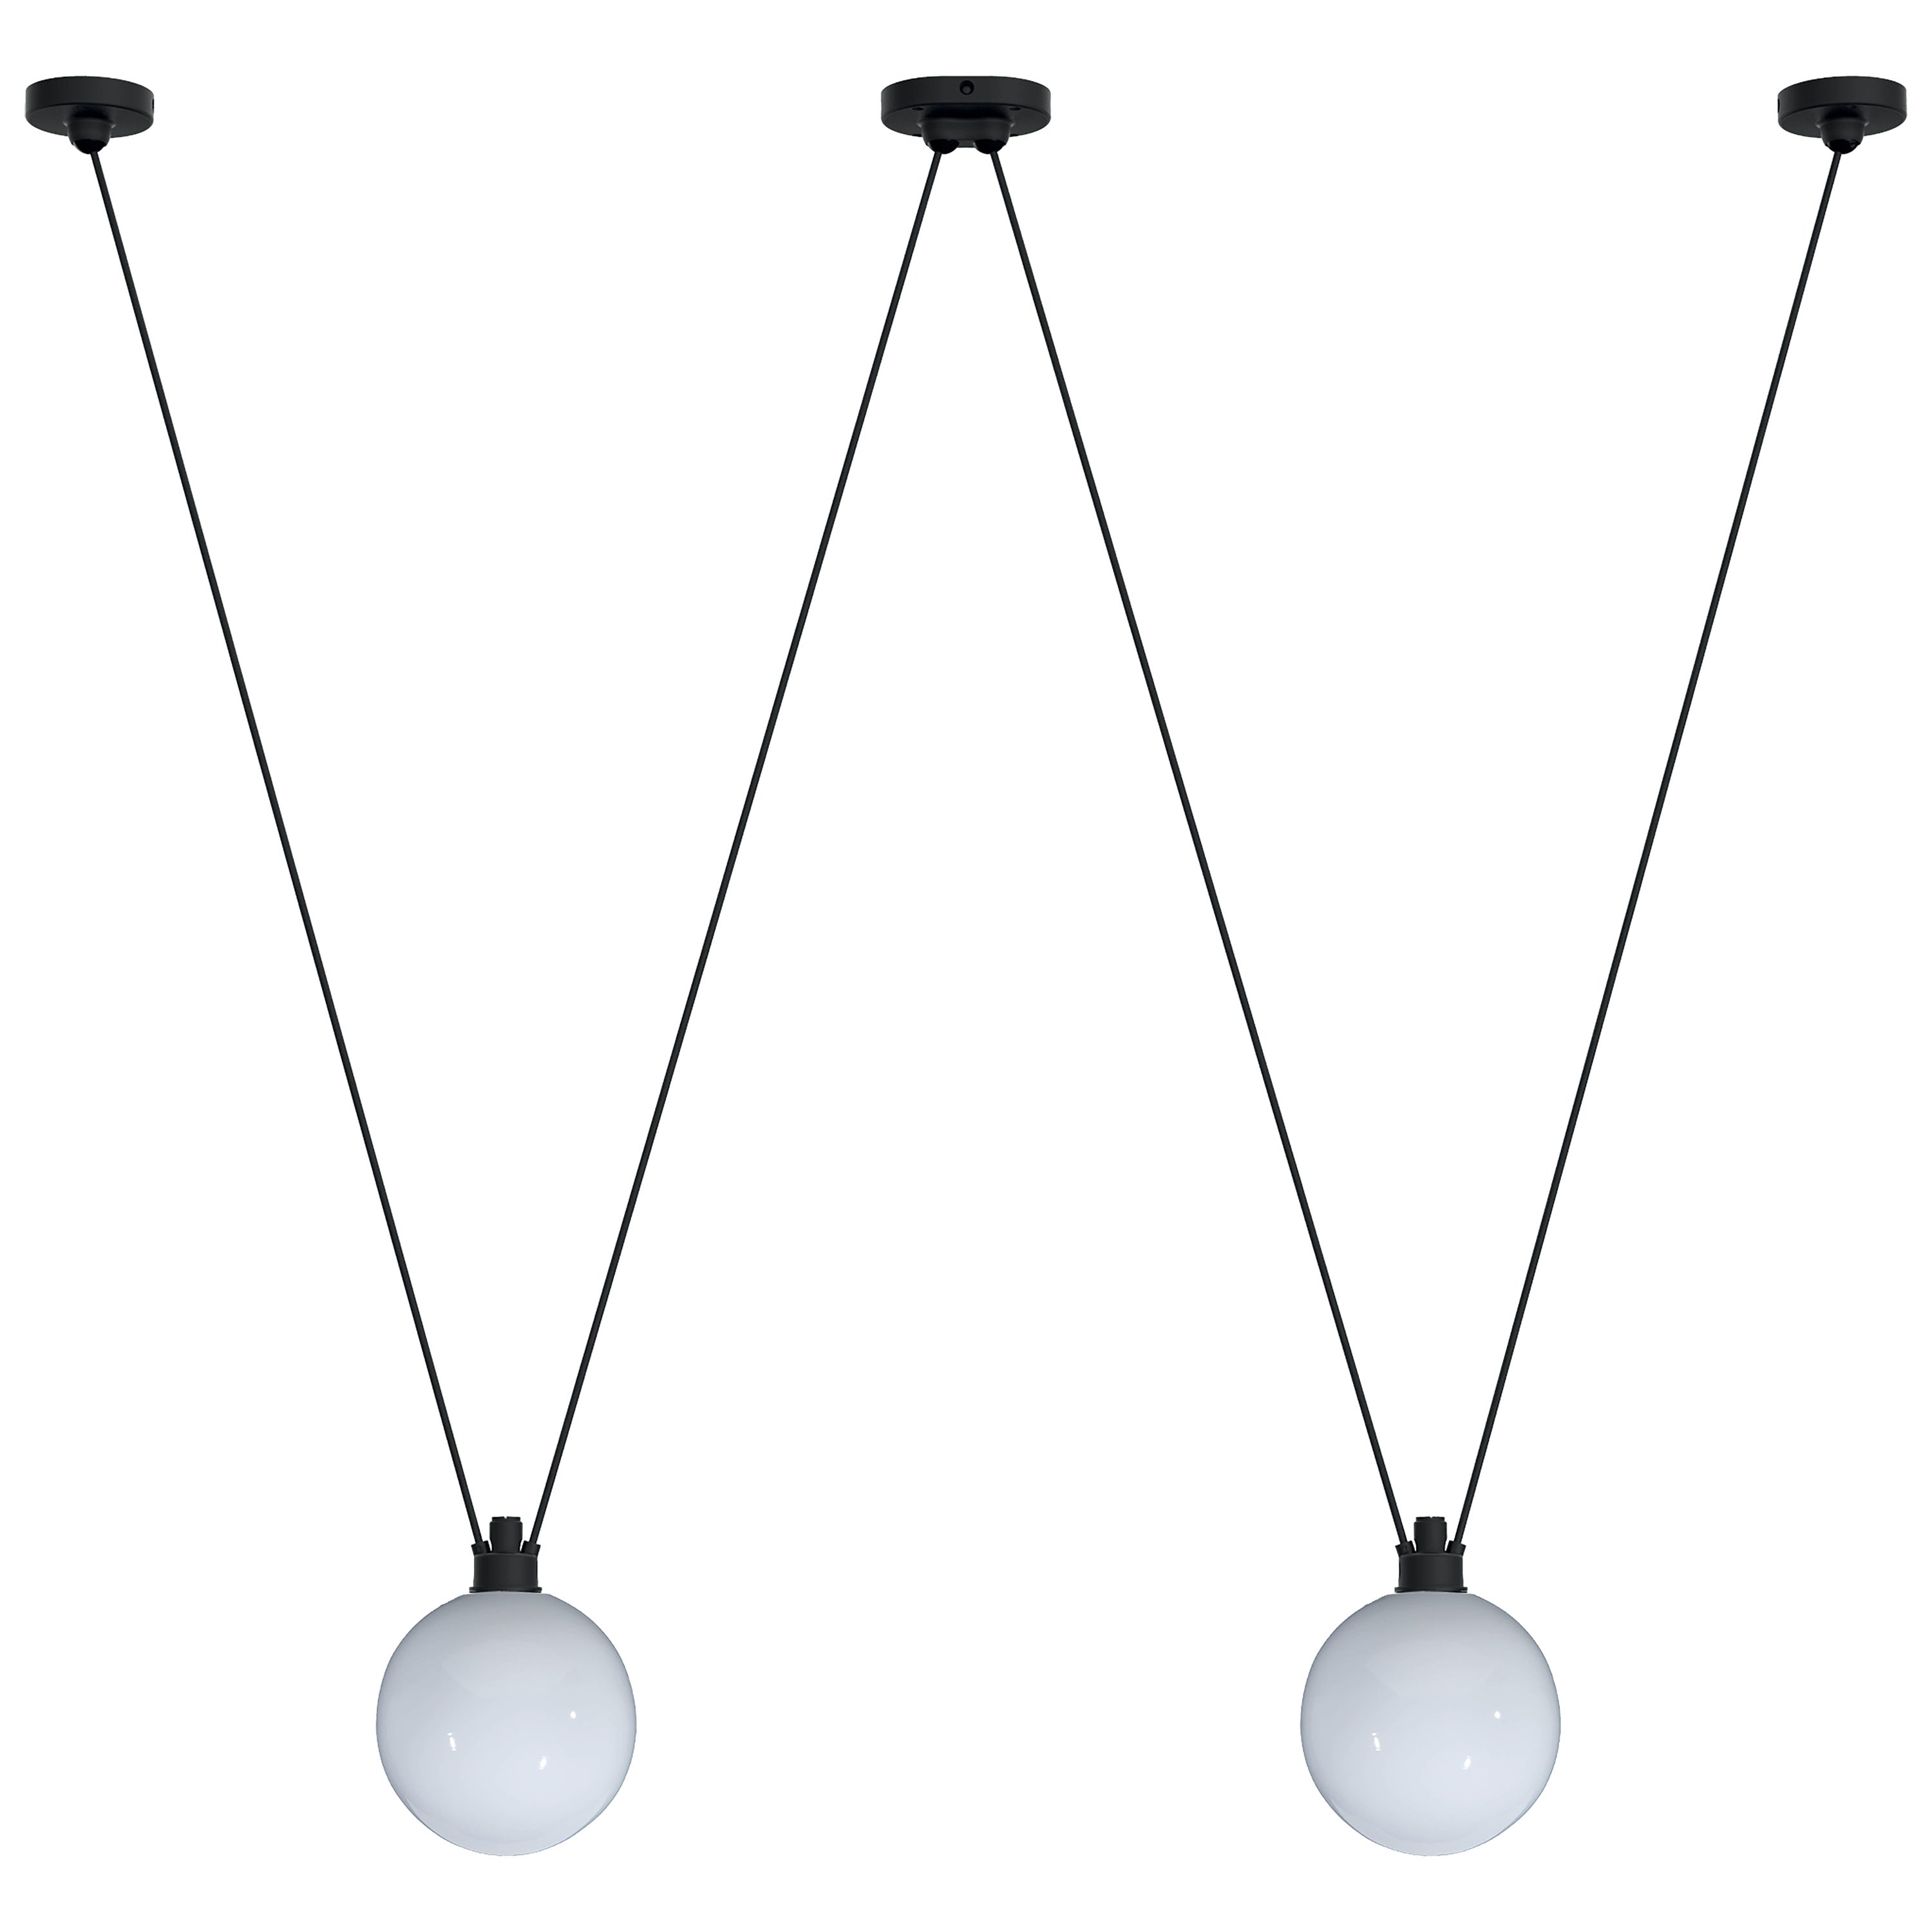 DCW Editions Les Acrobates N°324 Pendant Lamp in Black Arm and Large Glassball